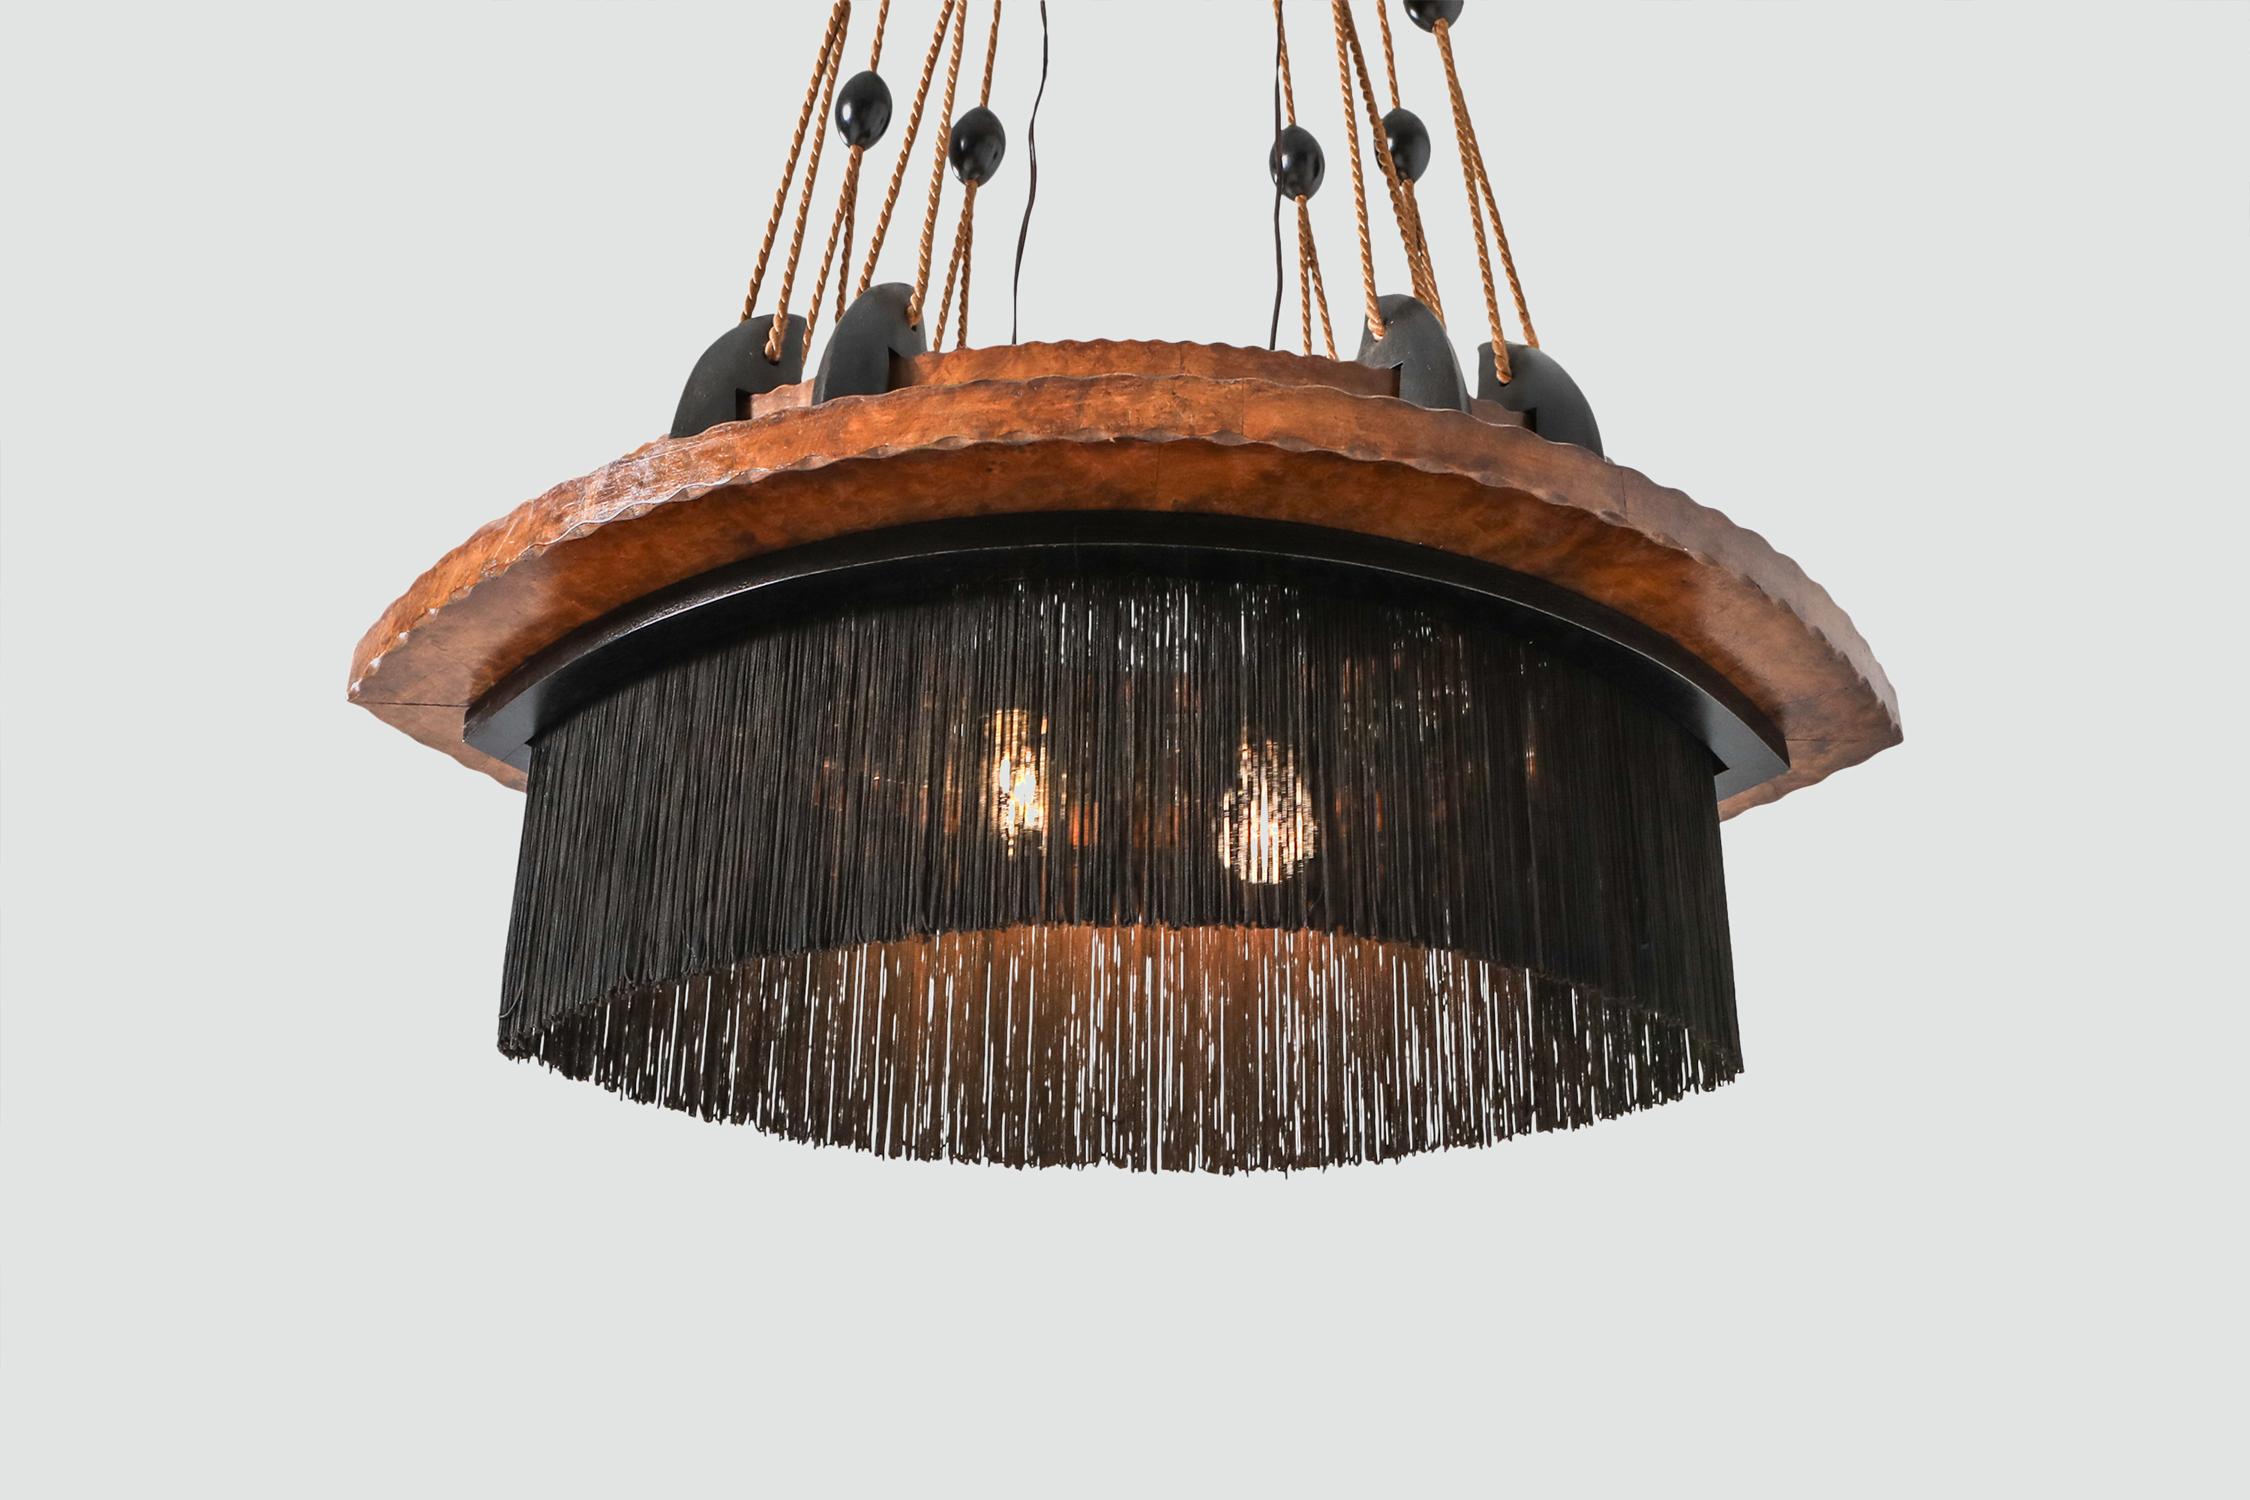 Art Deco Amsterdam School Chandelier in Ebony, Carved Wood, Glass in Lead and Silk For Sale